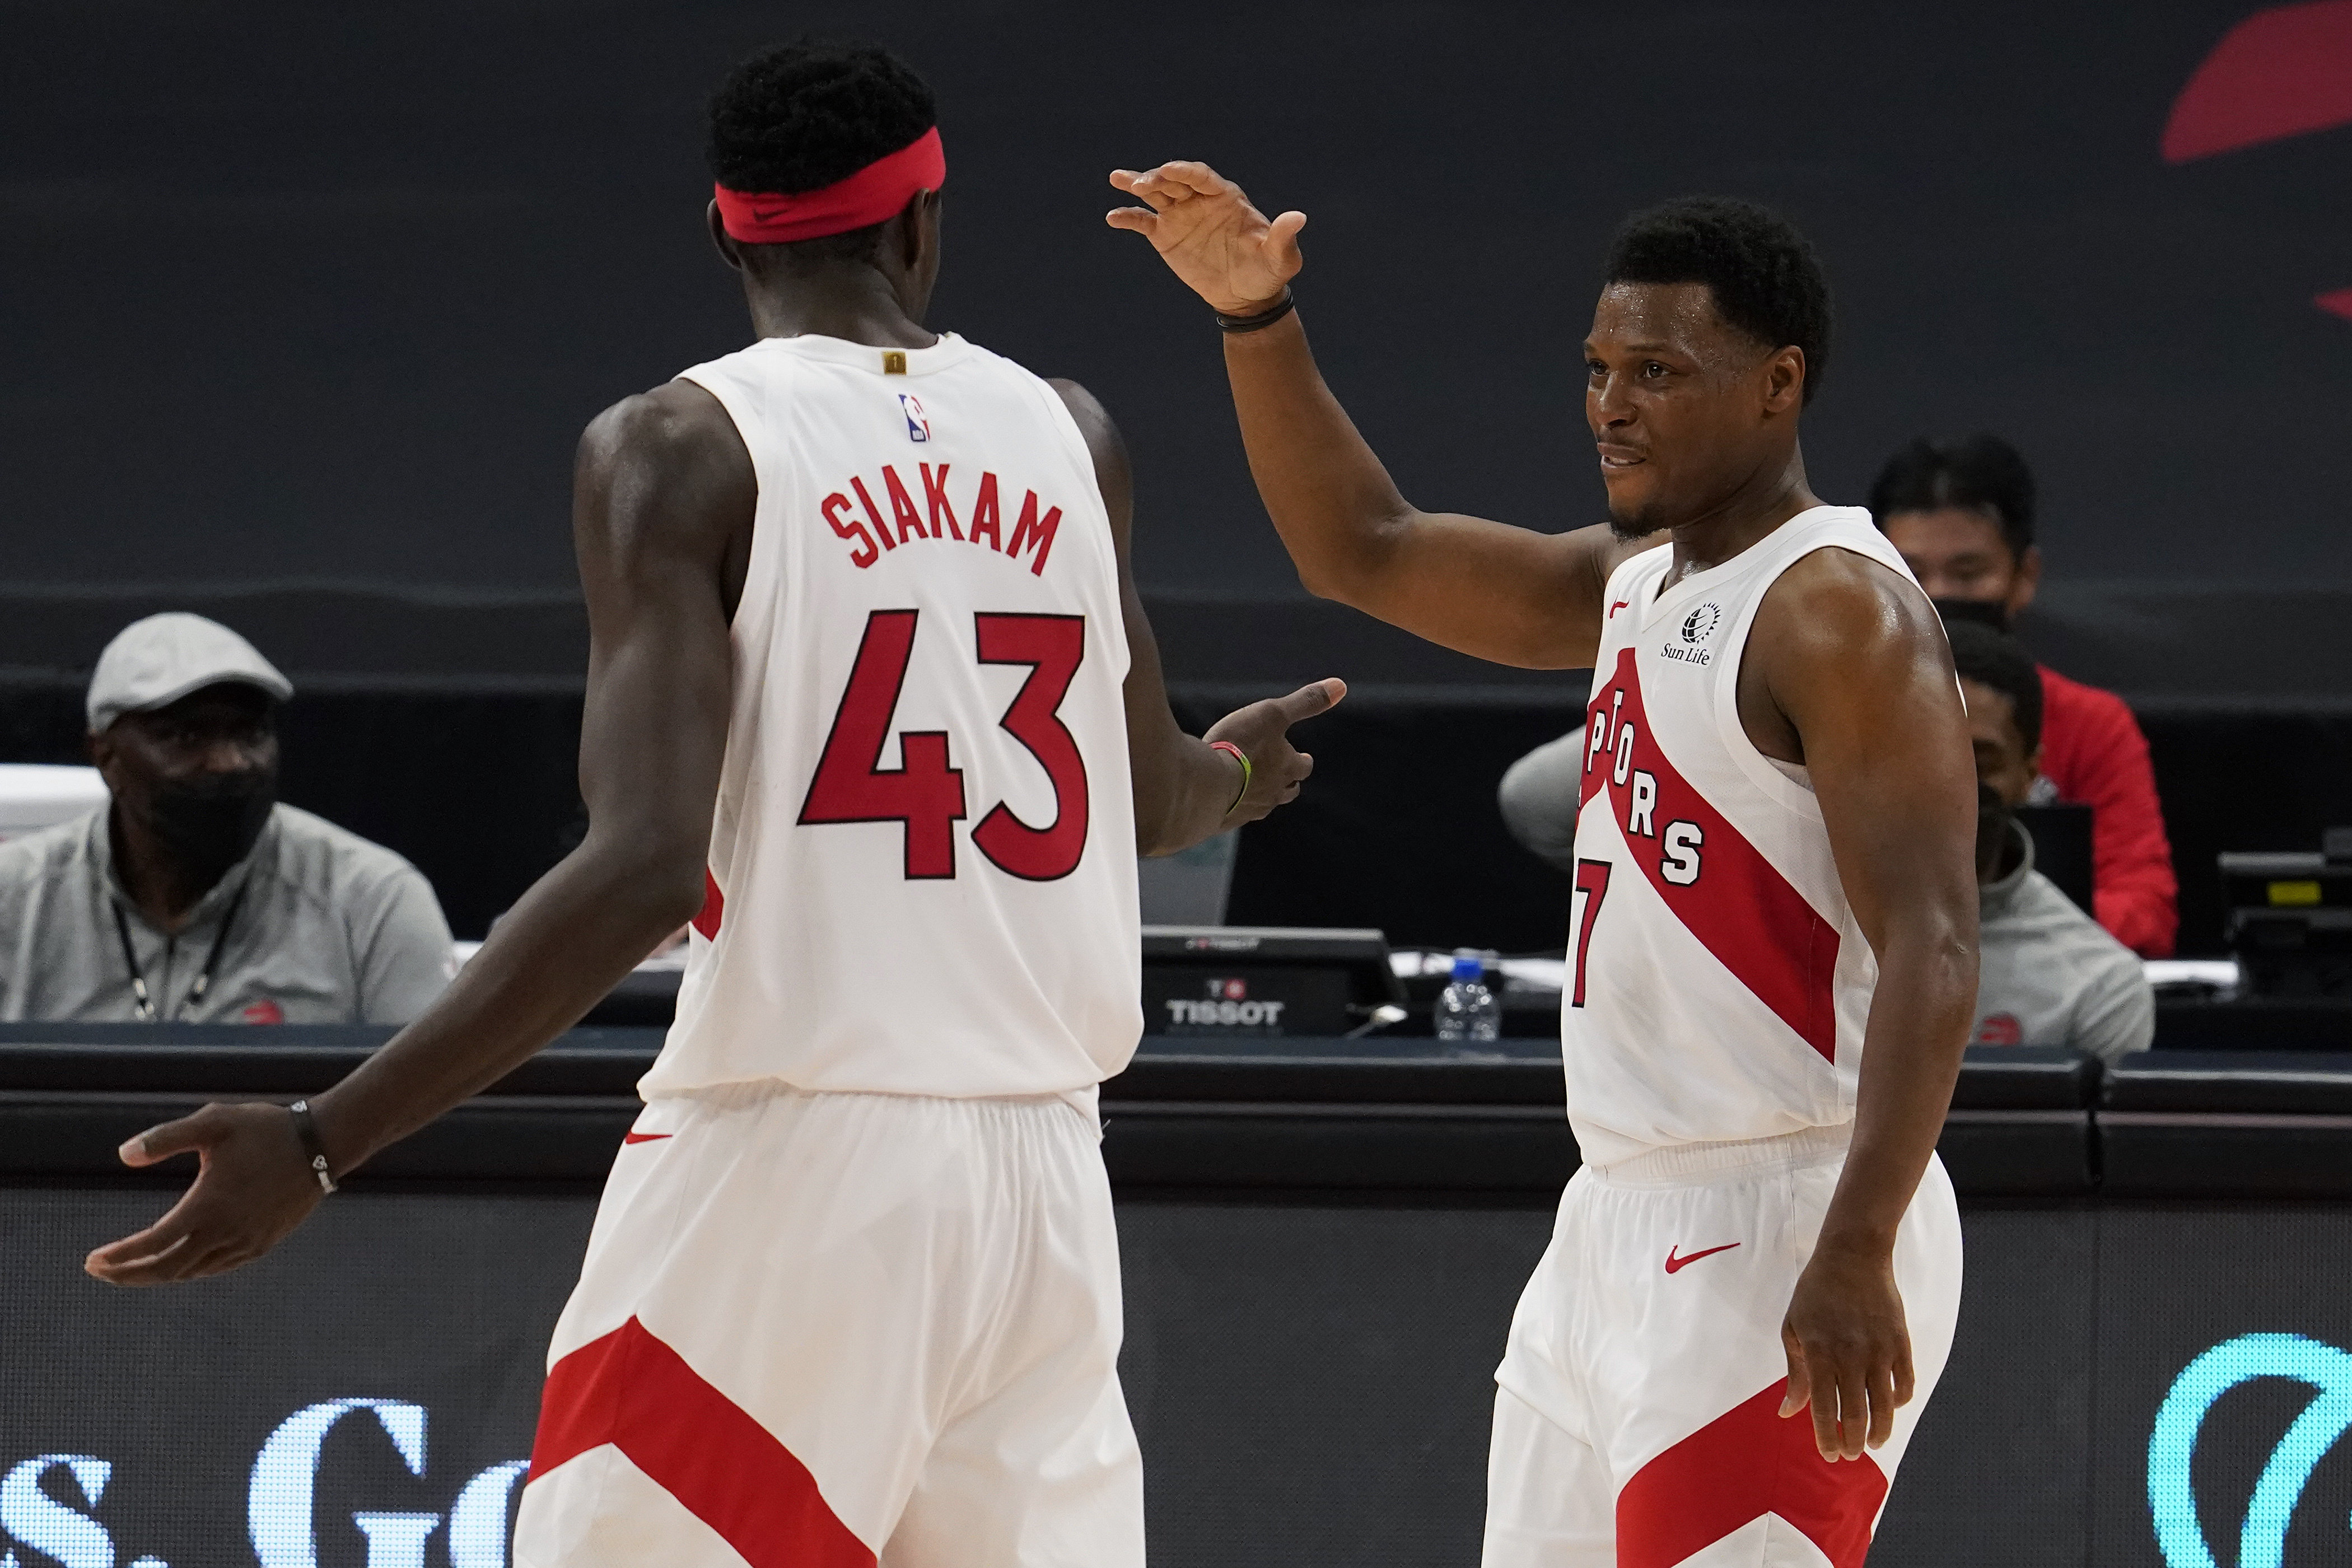 Toronto Raptors finally snap 9 game losing skid in what might have been Kyle Lowry’s finale